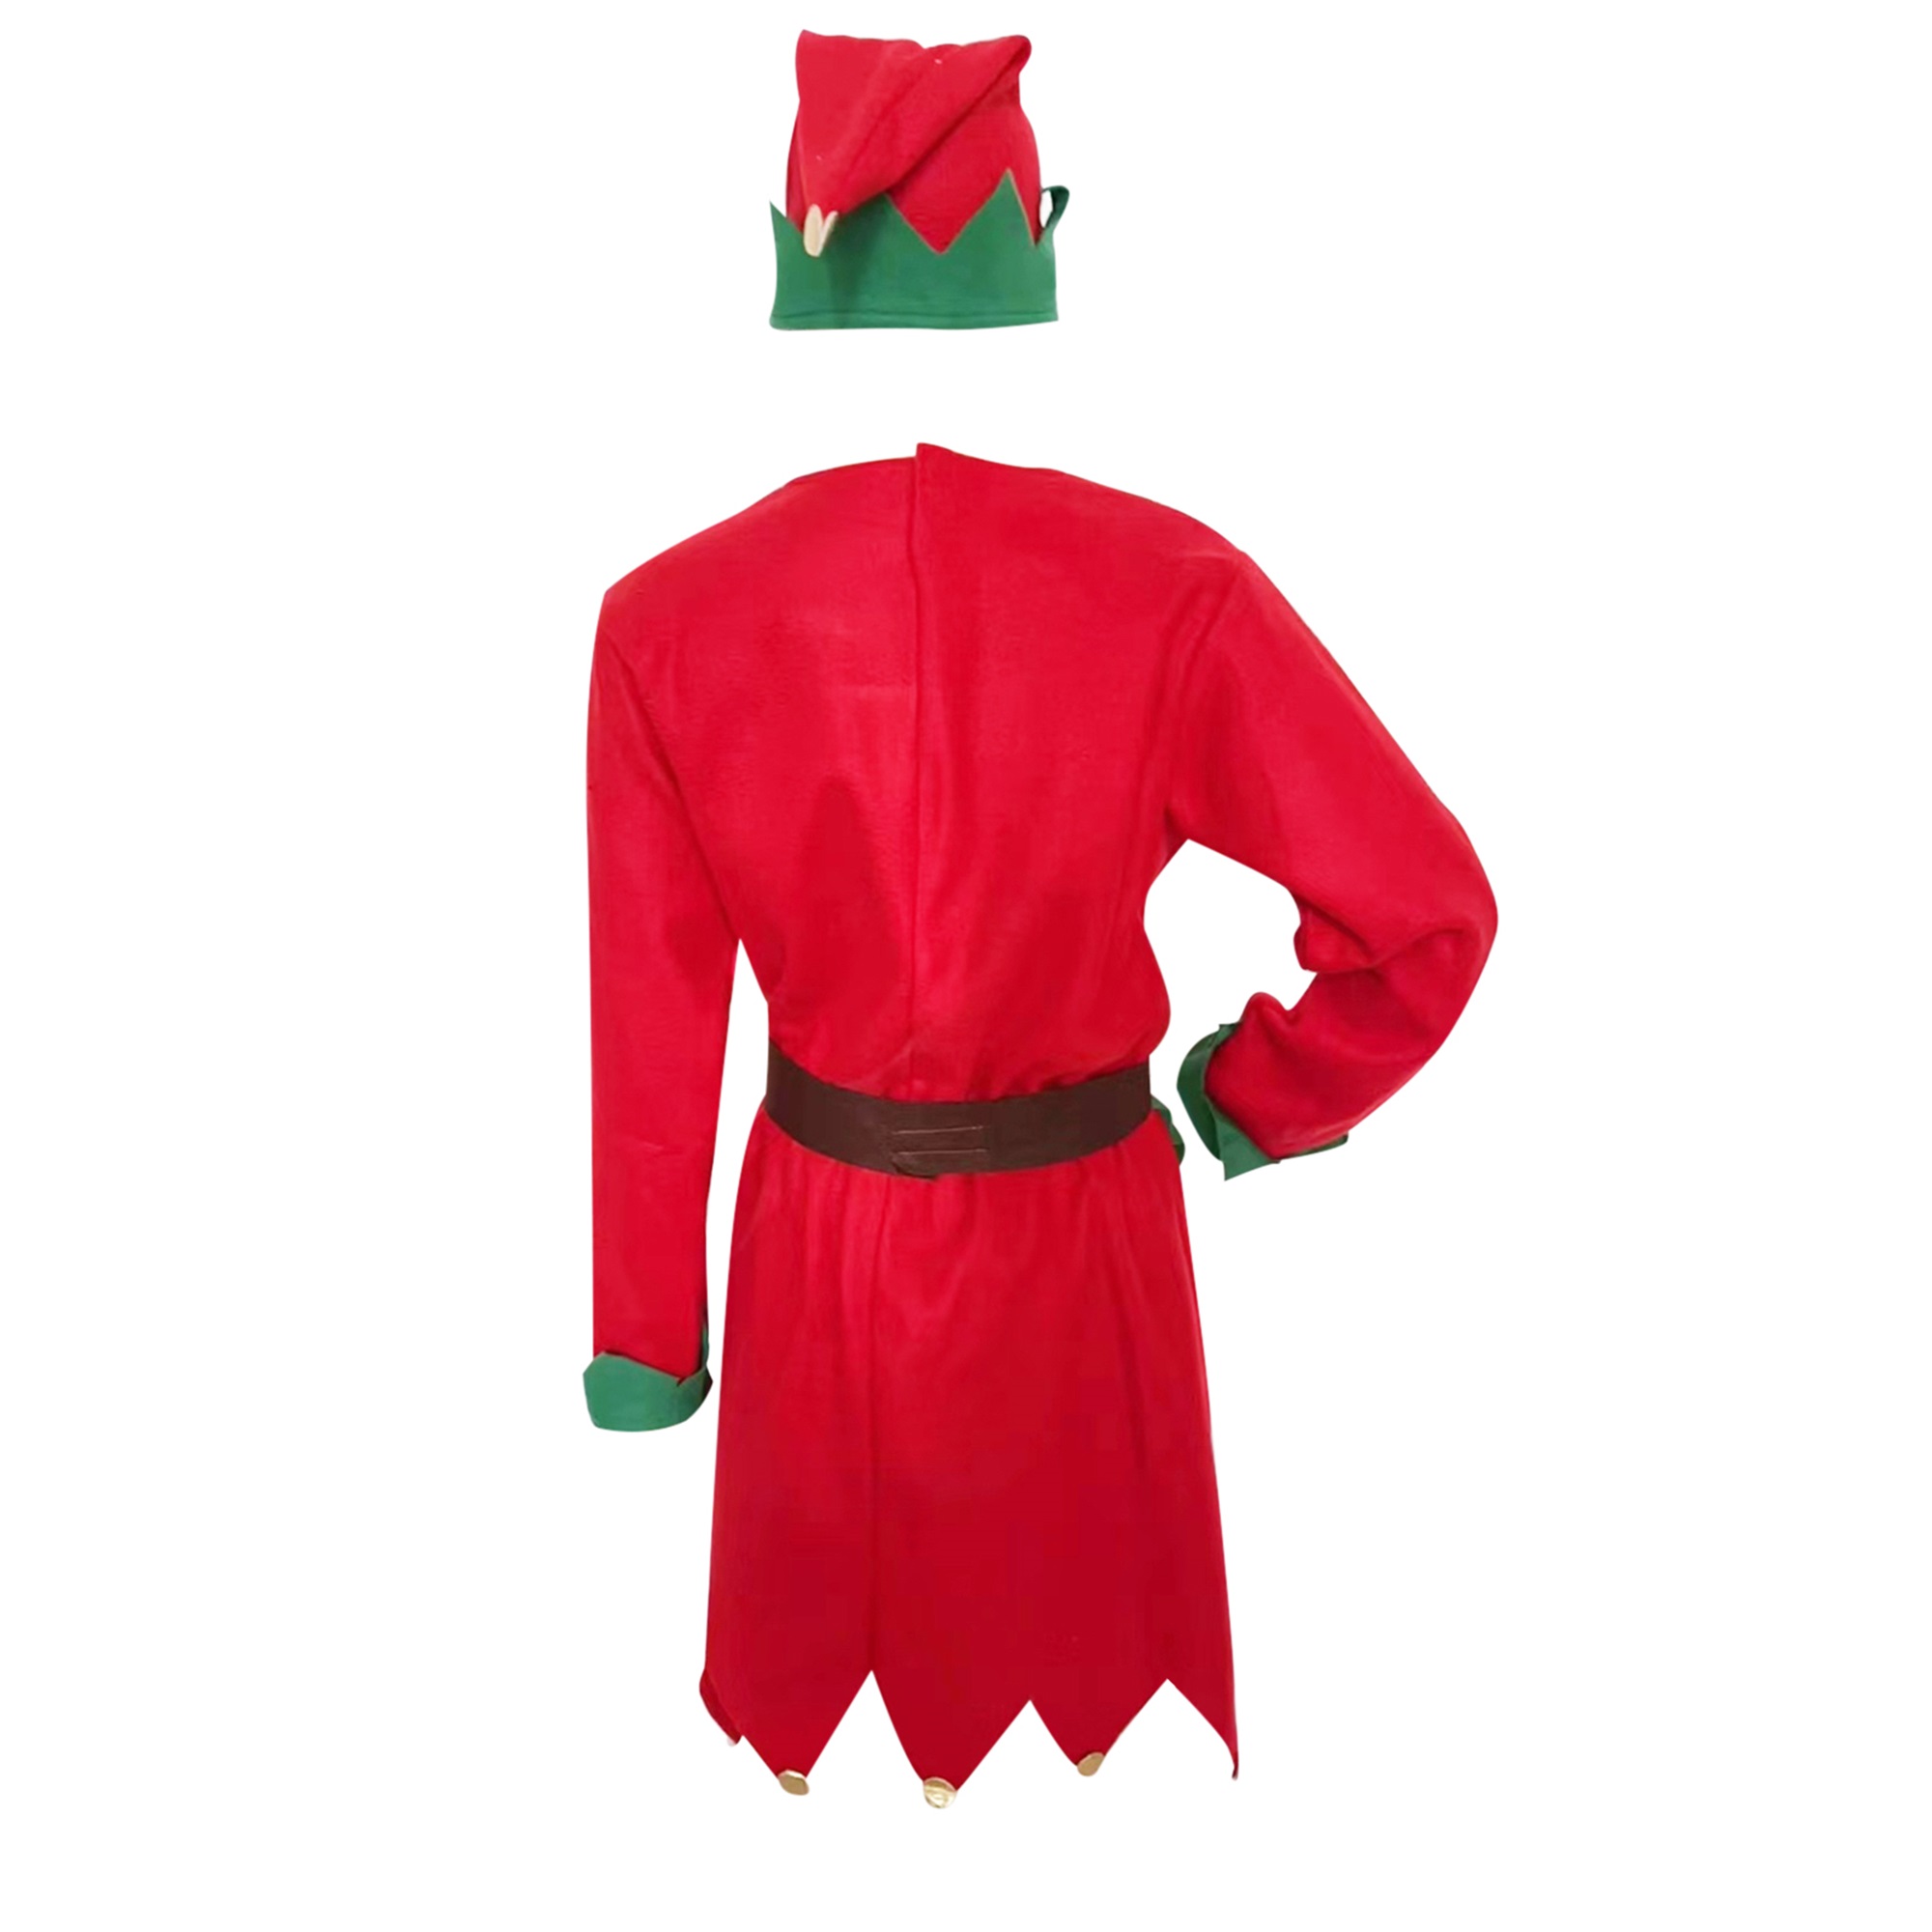 Douhoow Women Christmas Elf Girl Costume, Long Sleeve Dress+Hat+Shoes+Striped Stockings - image 3 of 9